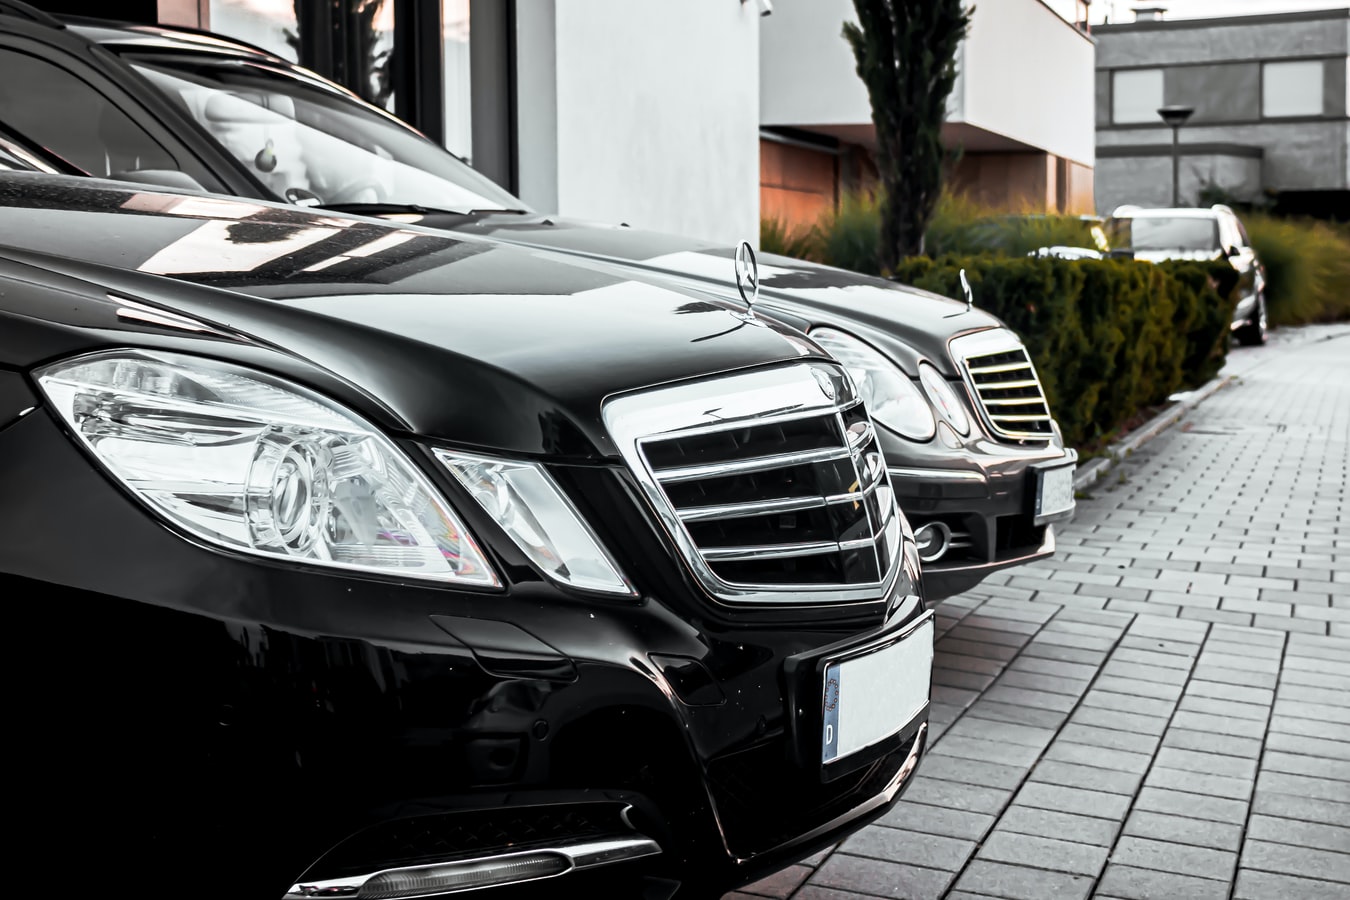 fleet for conference with chauffeur services in Melbourne